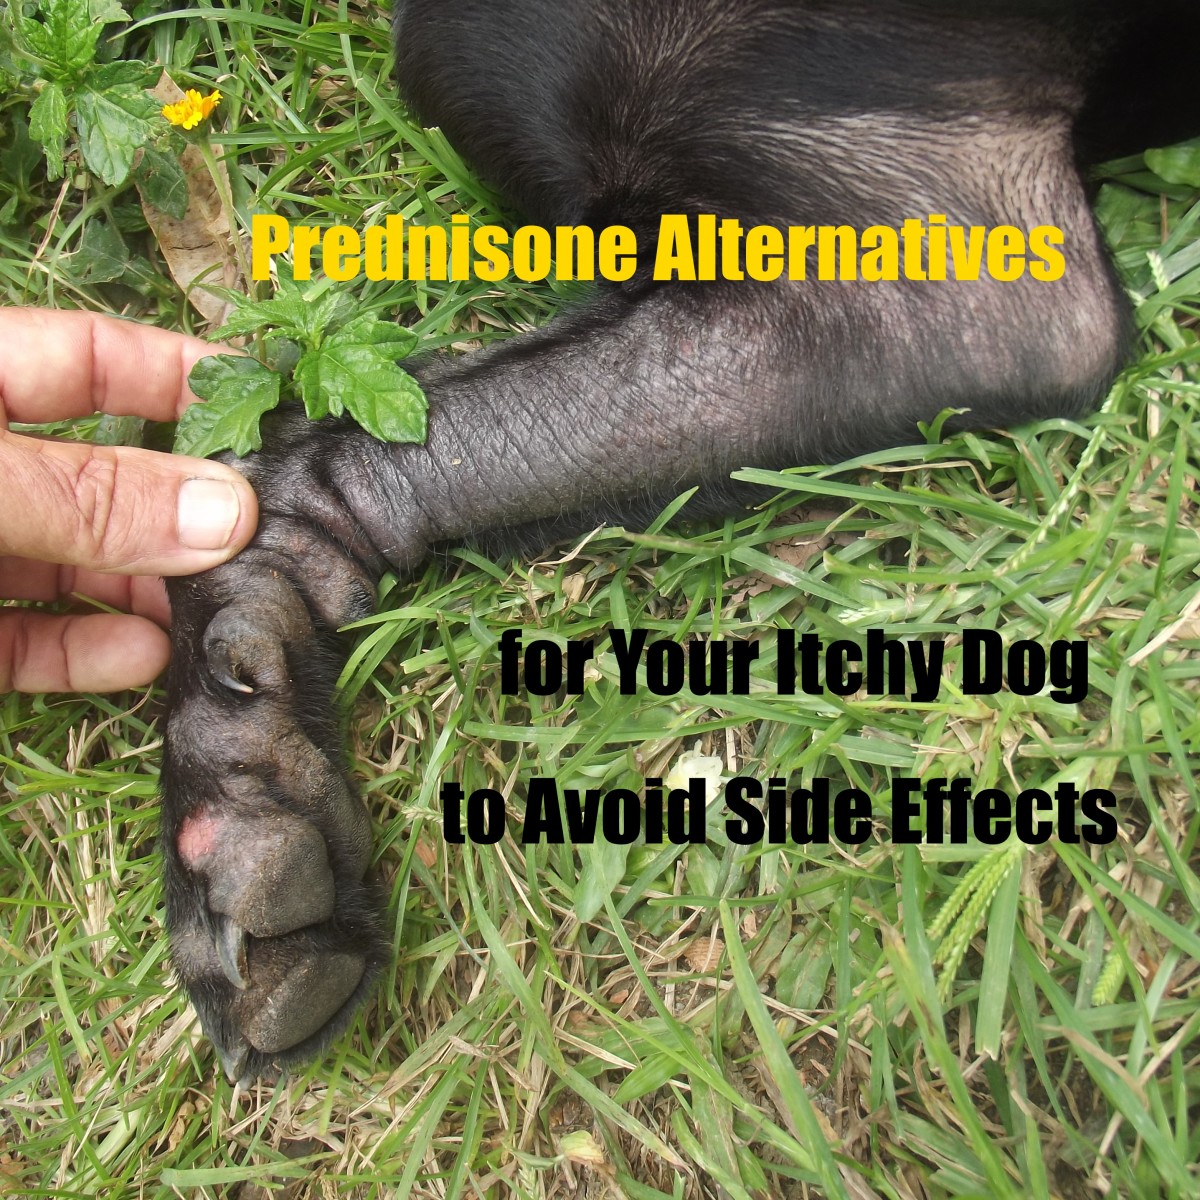 Itchy Dog? Prednisone Alternatives To Avoid the Serious Side Effects